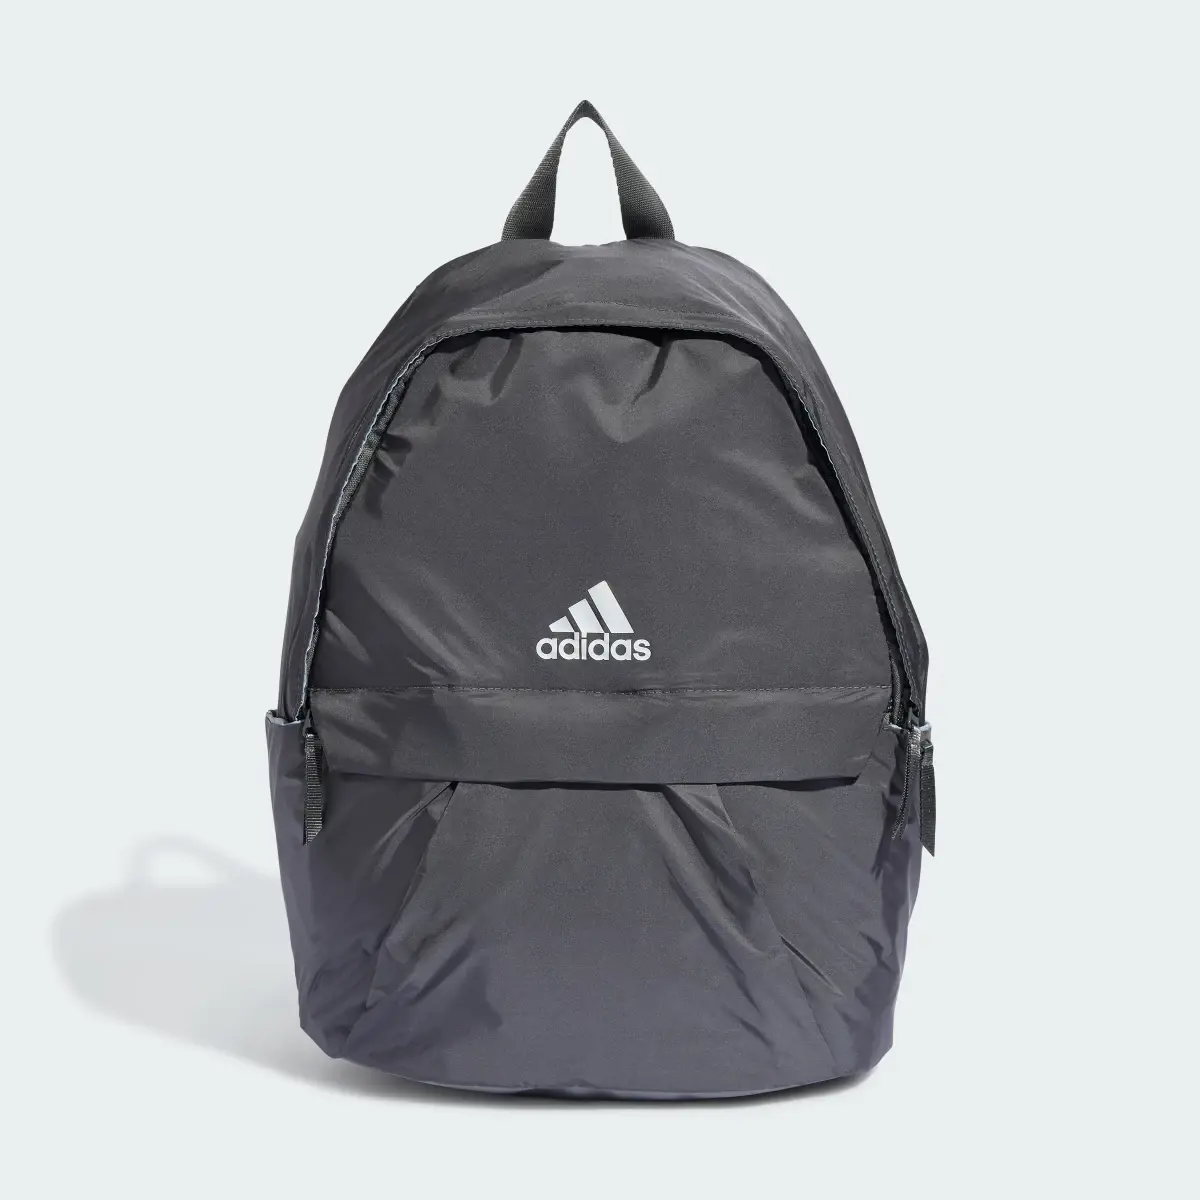 Adidas Classic Gen Z Backpack. 2